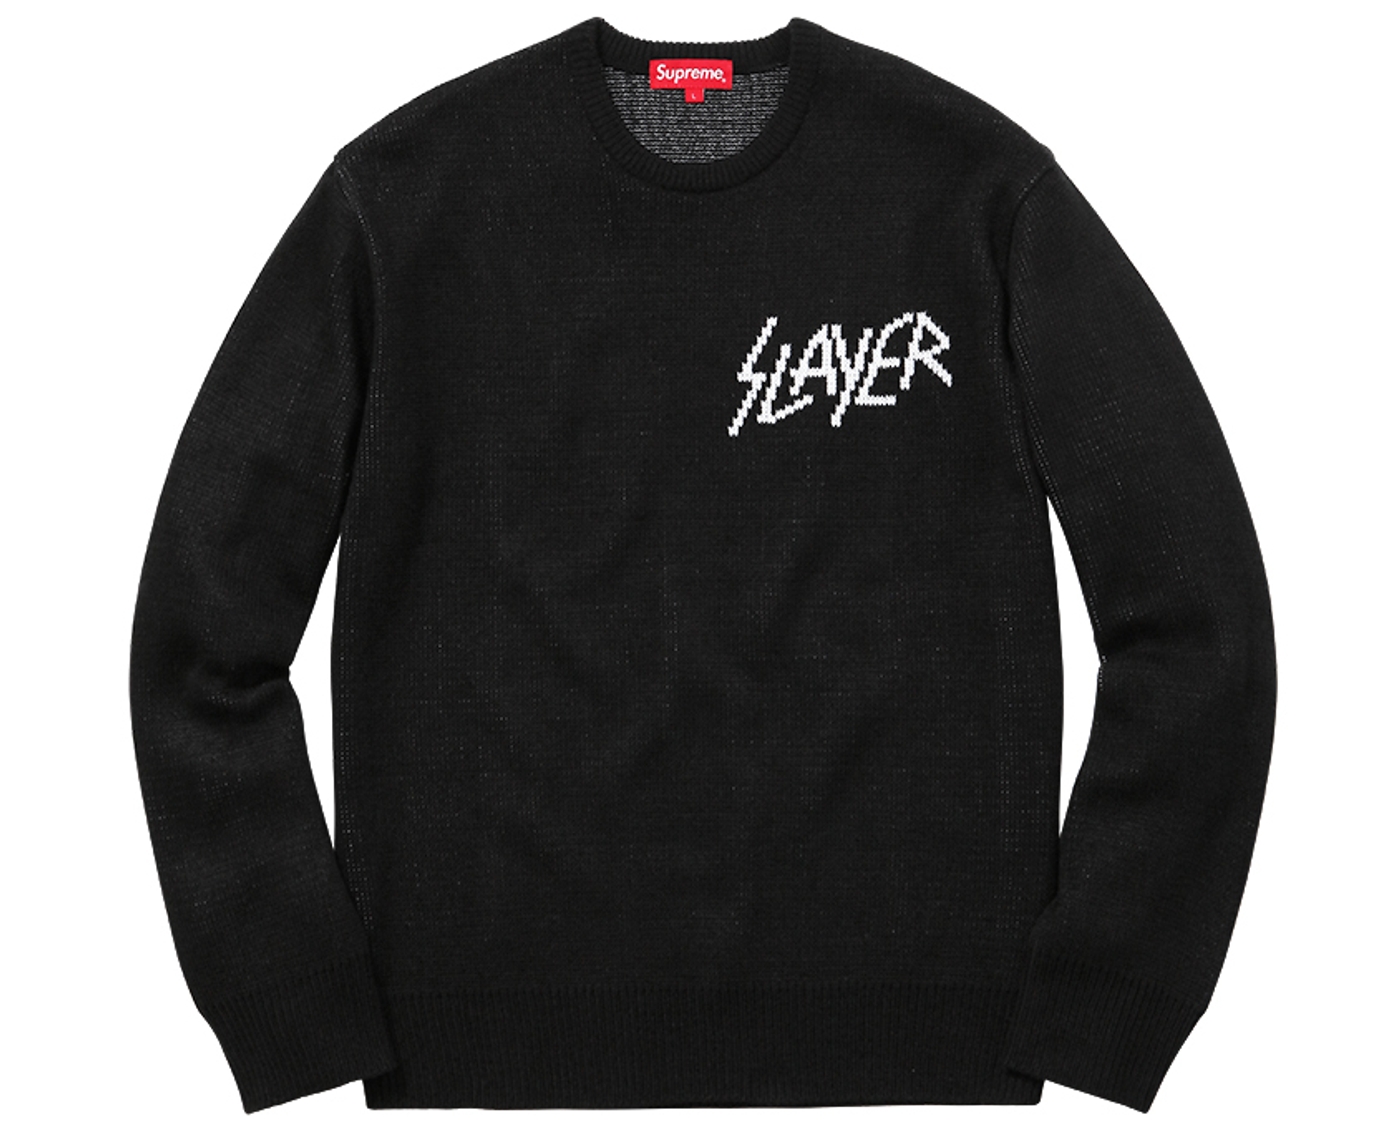 Reign In Blood Sweater (15/27)